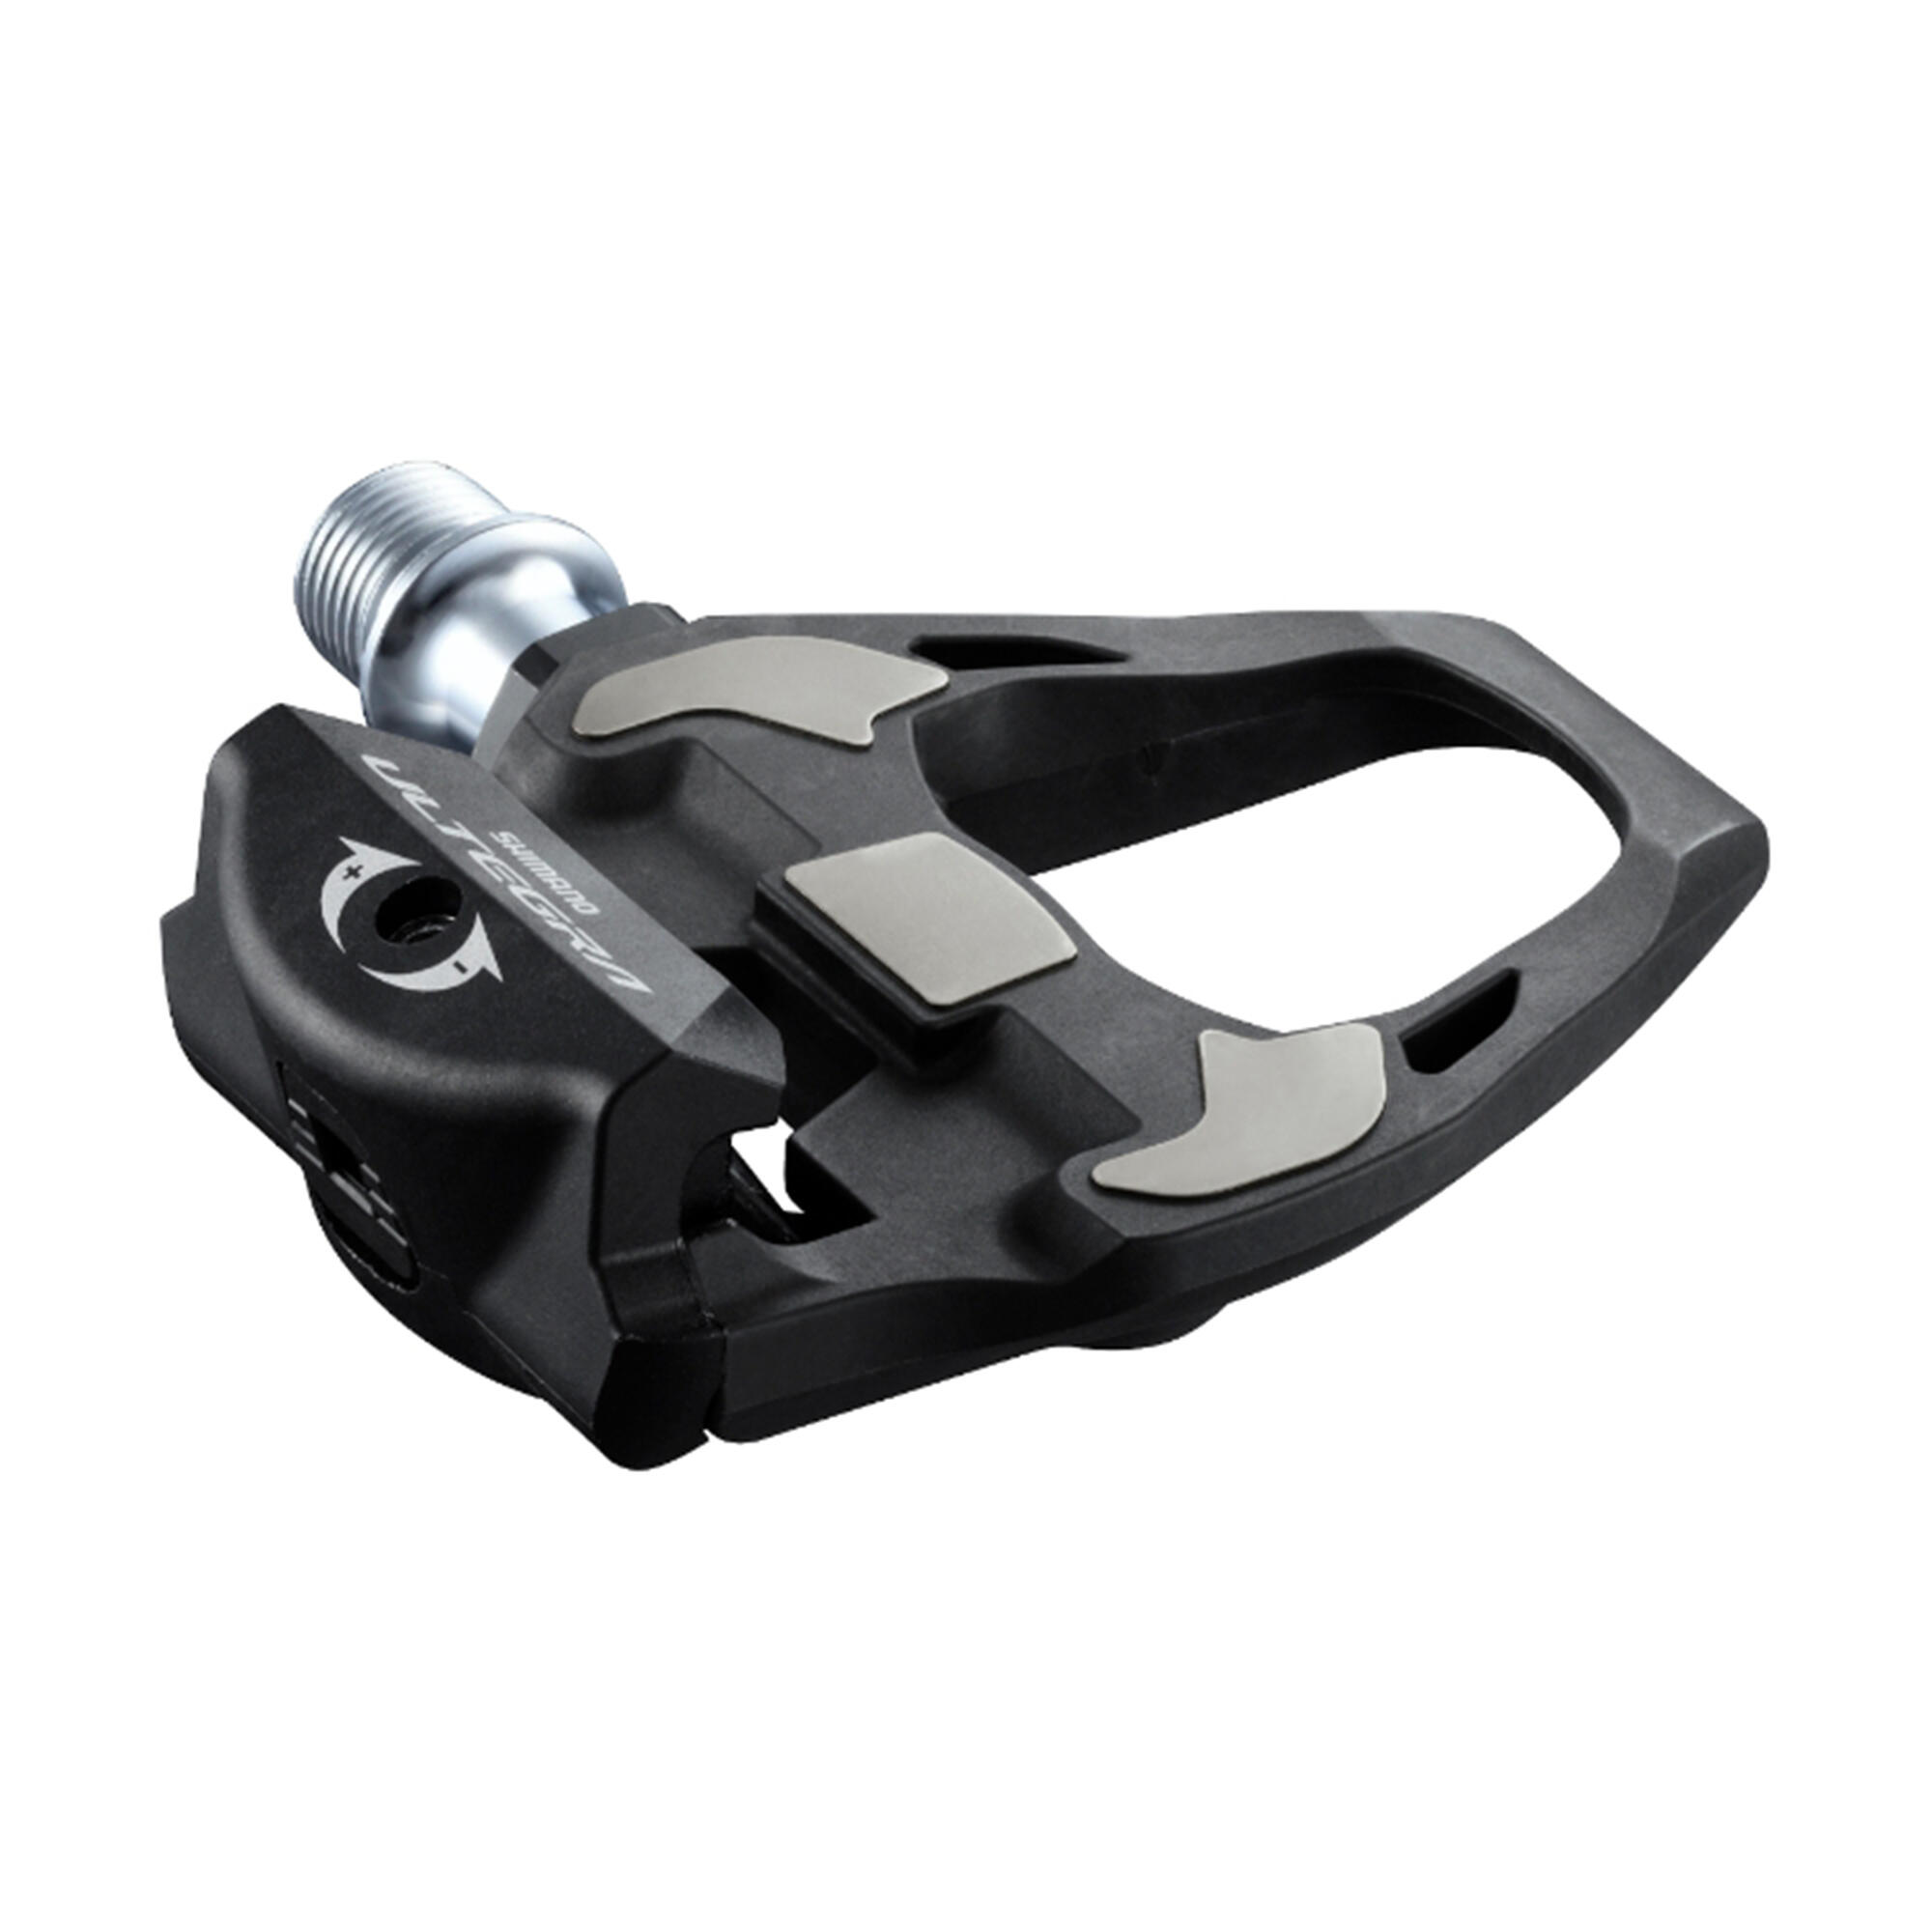 Pair of Pedals Ultegra PD-R8000 + Cleats 3/3